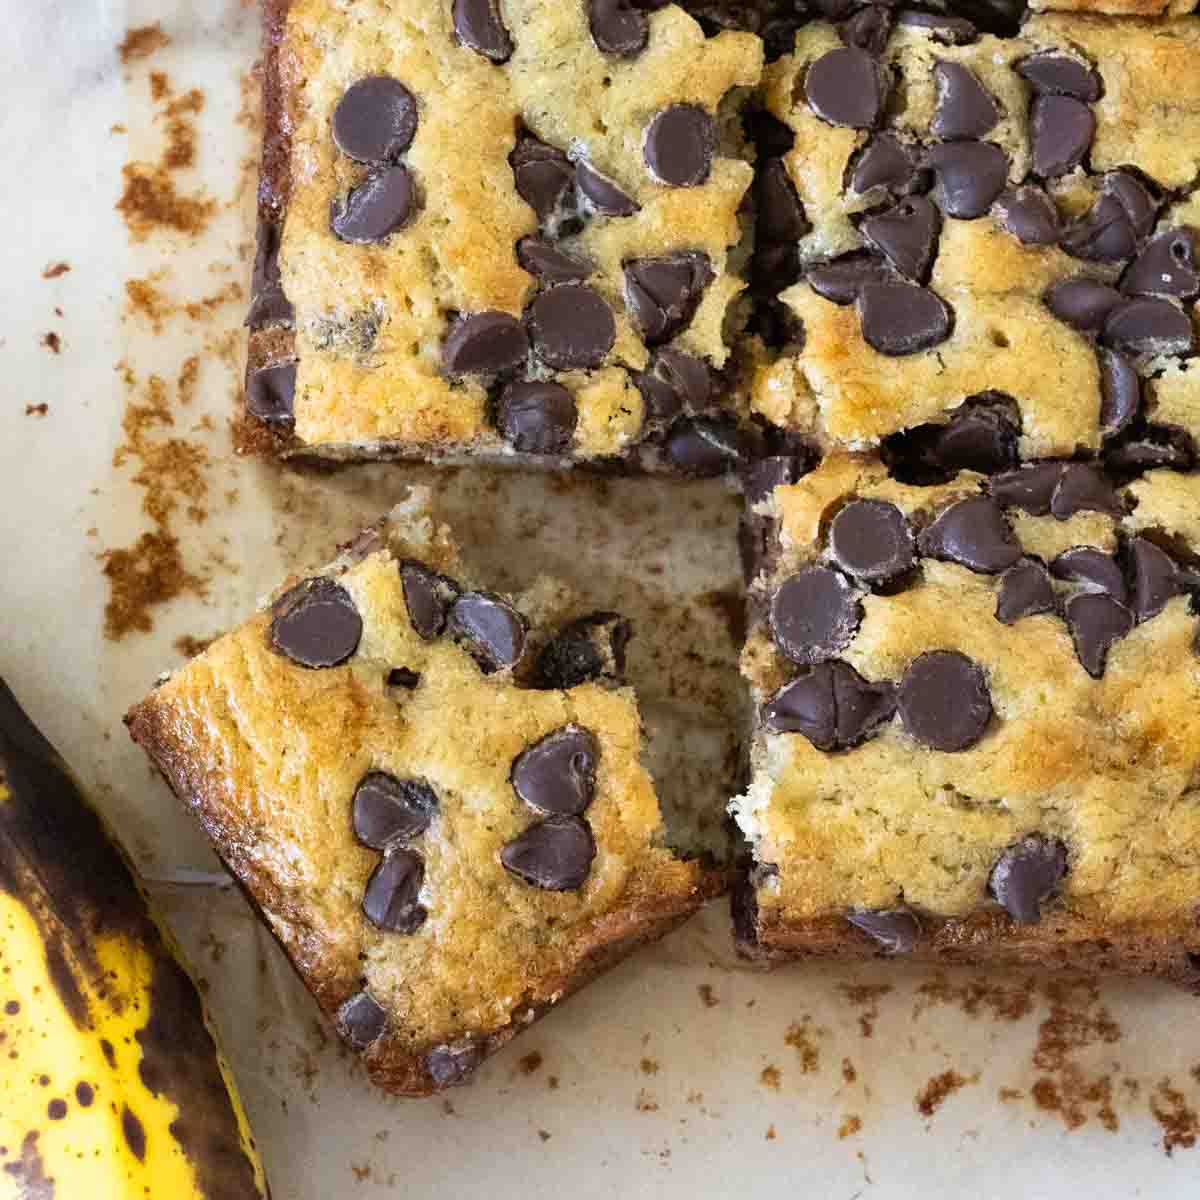 Corner piece of the banana cake with plenty of chocolate chips on top. 